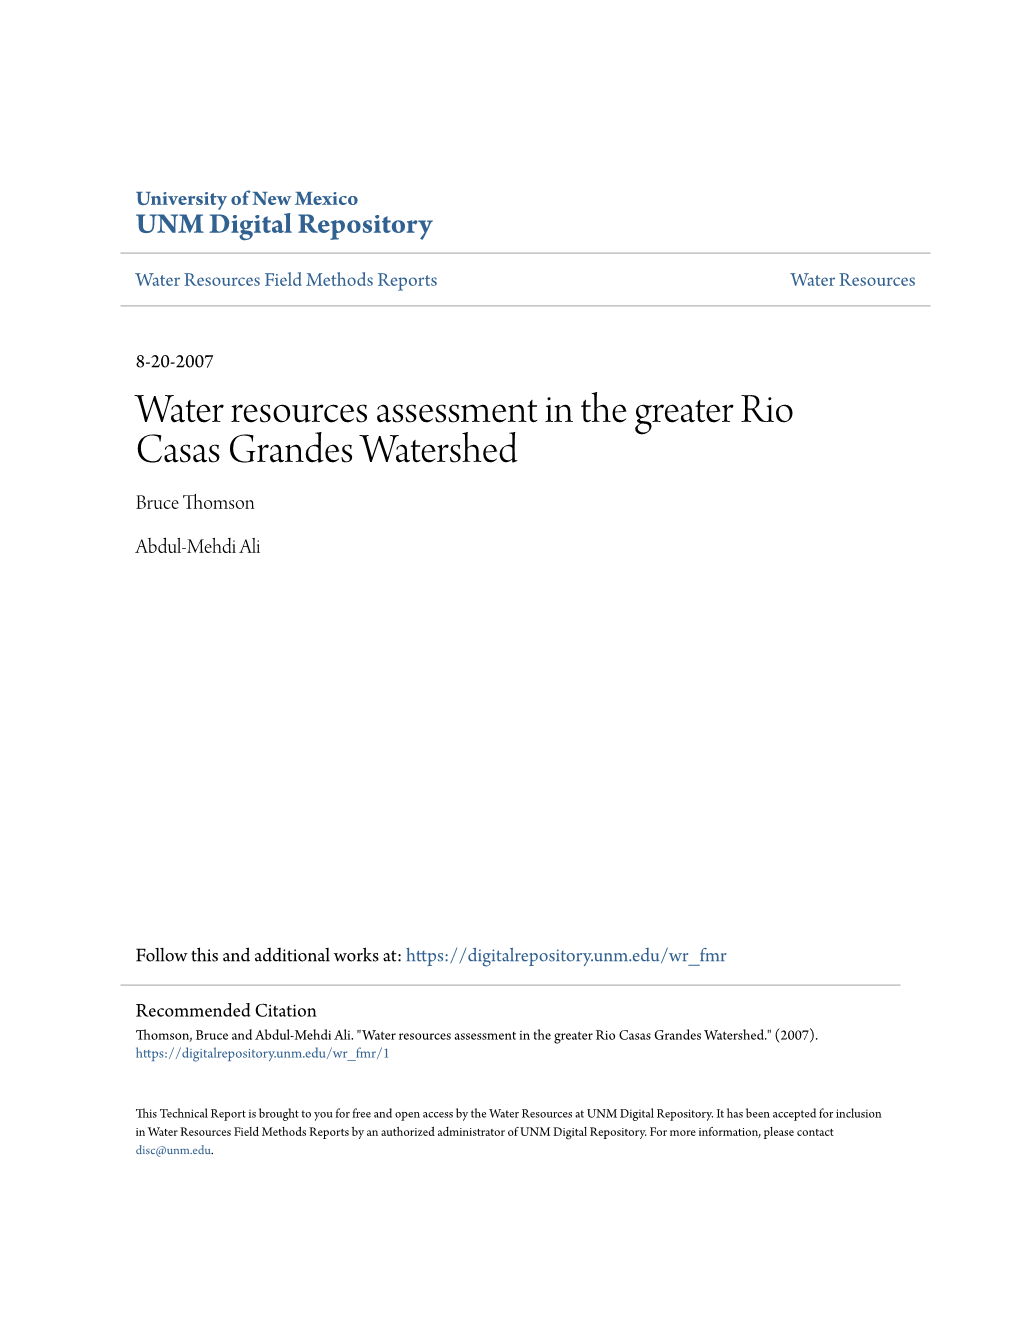 Water Resources Assessment in the Greater Rio Casas Grandes Watershed Bruce Thomson